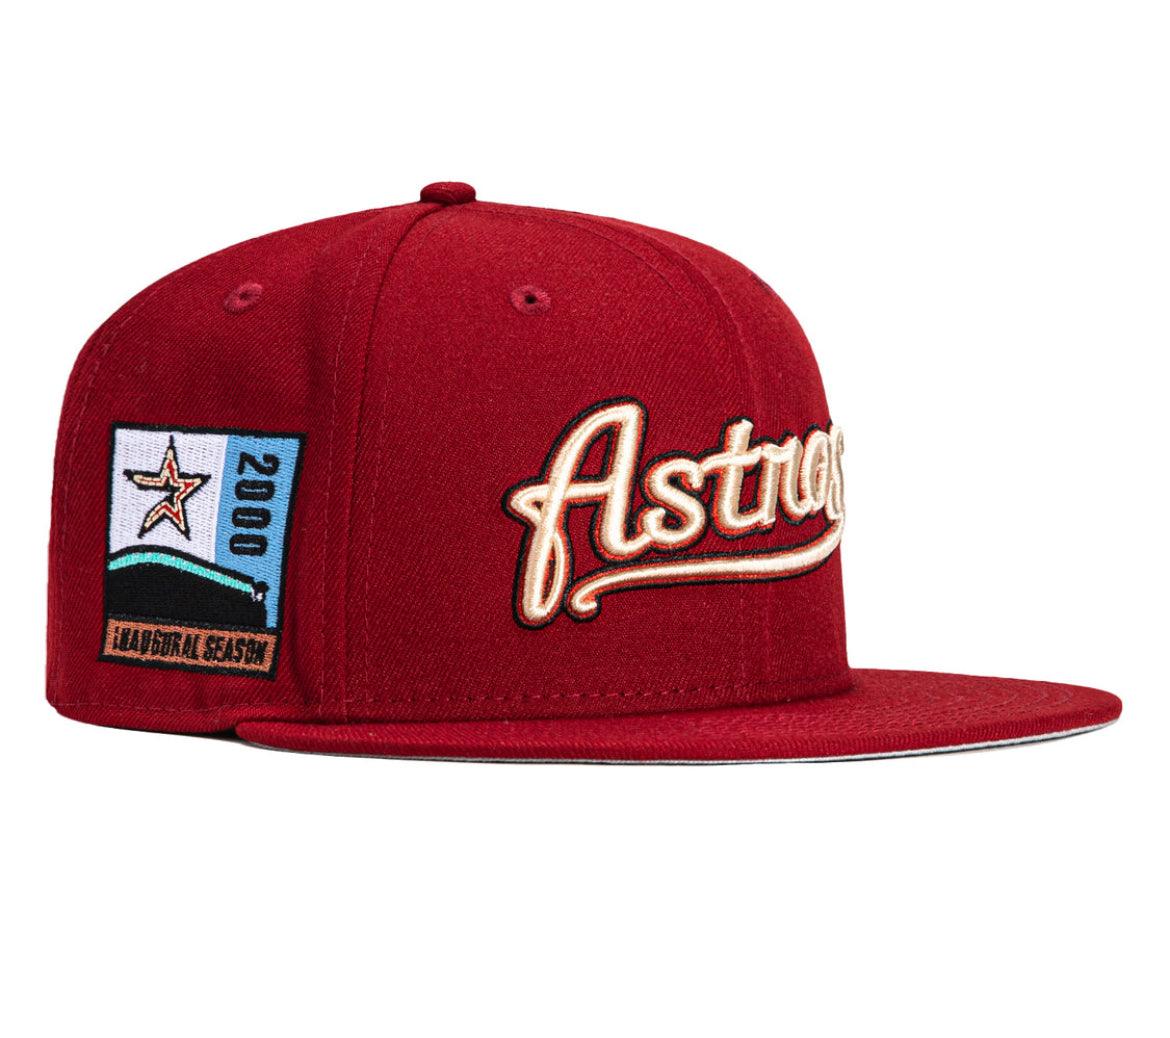 Astros brick/gold script/inaugural patch New Era Fitted Hat - BeisbolMXShop